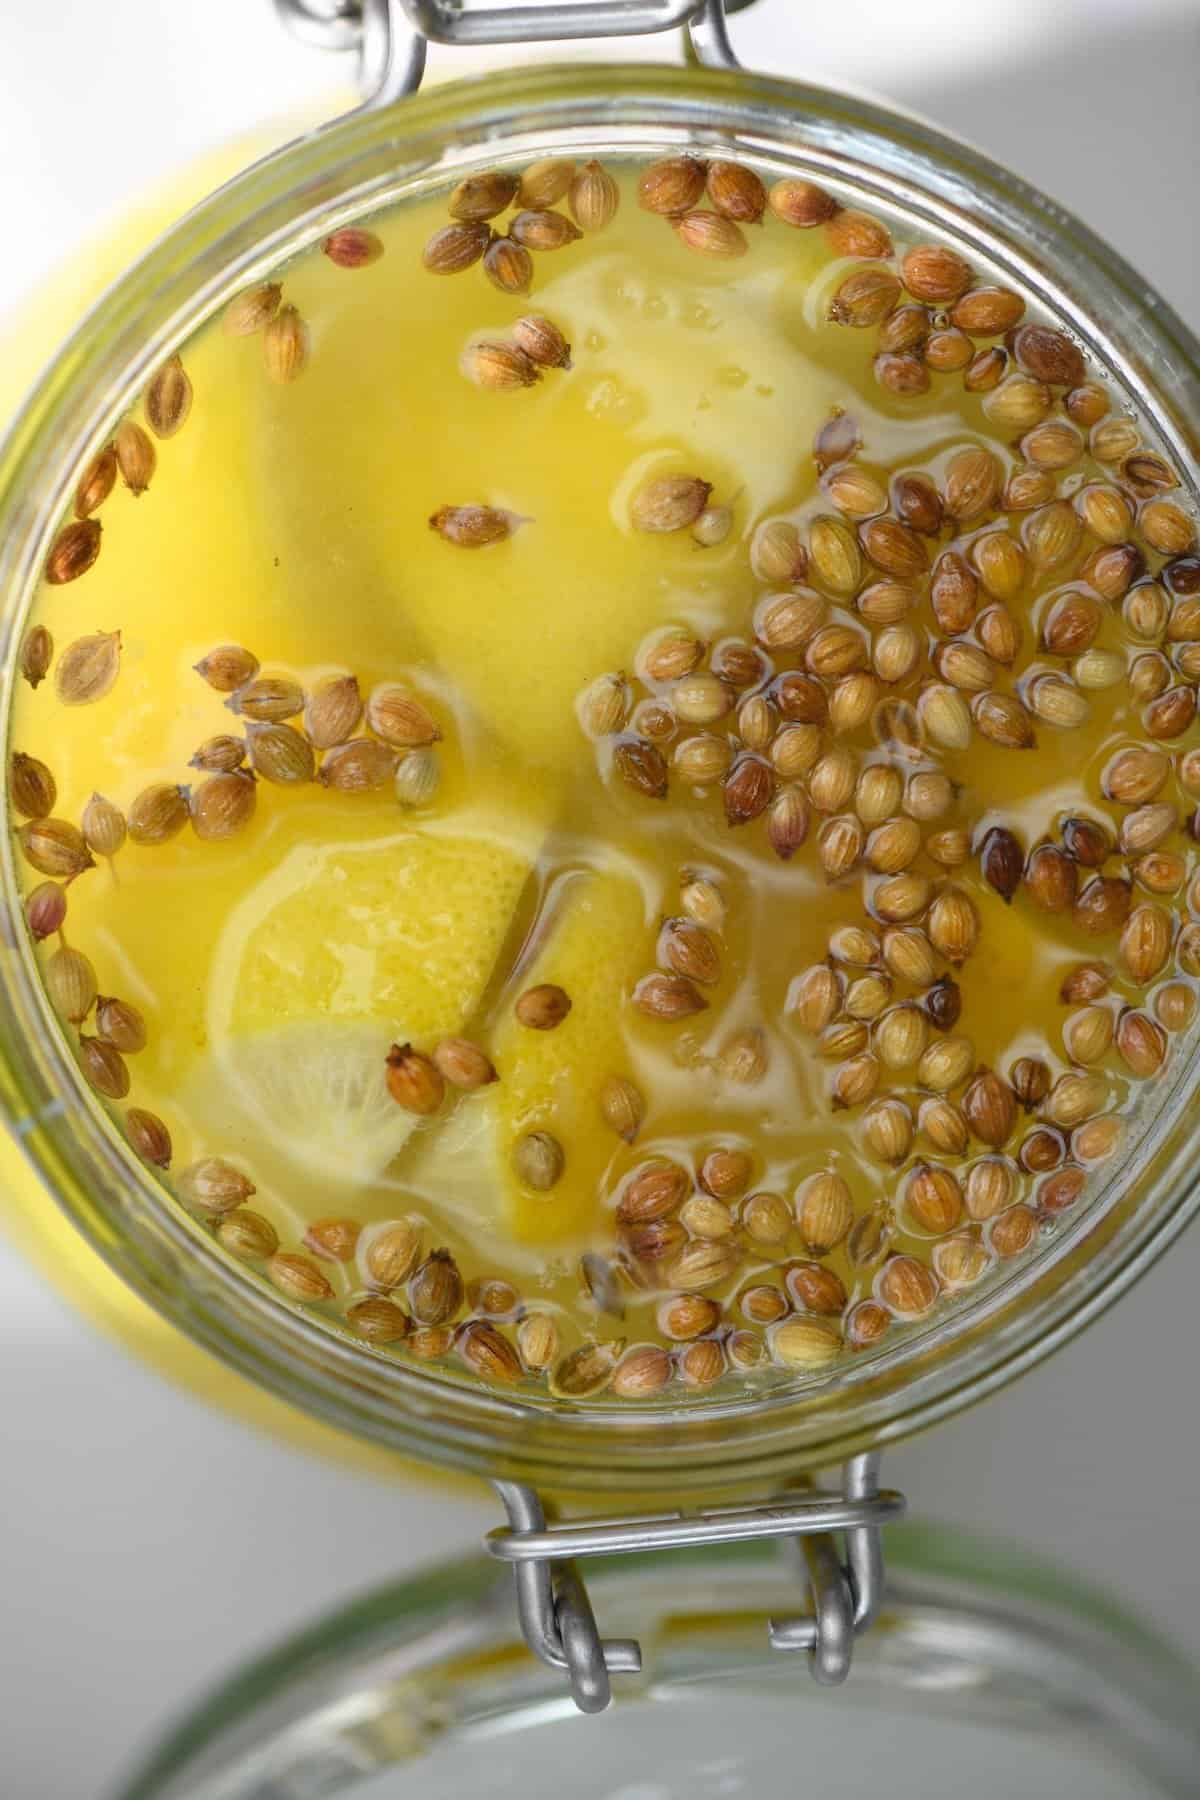 Top view of jar with preserved lemons with coriander seeds